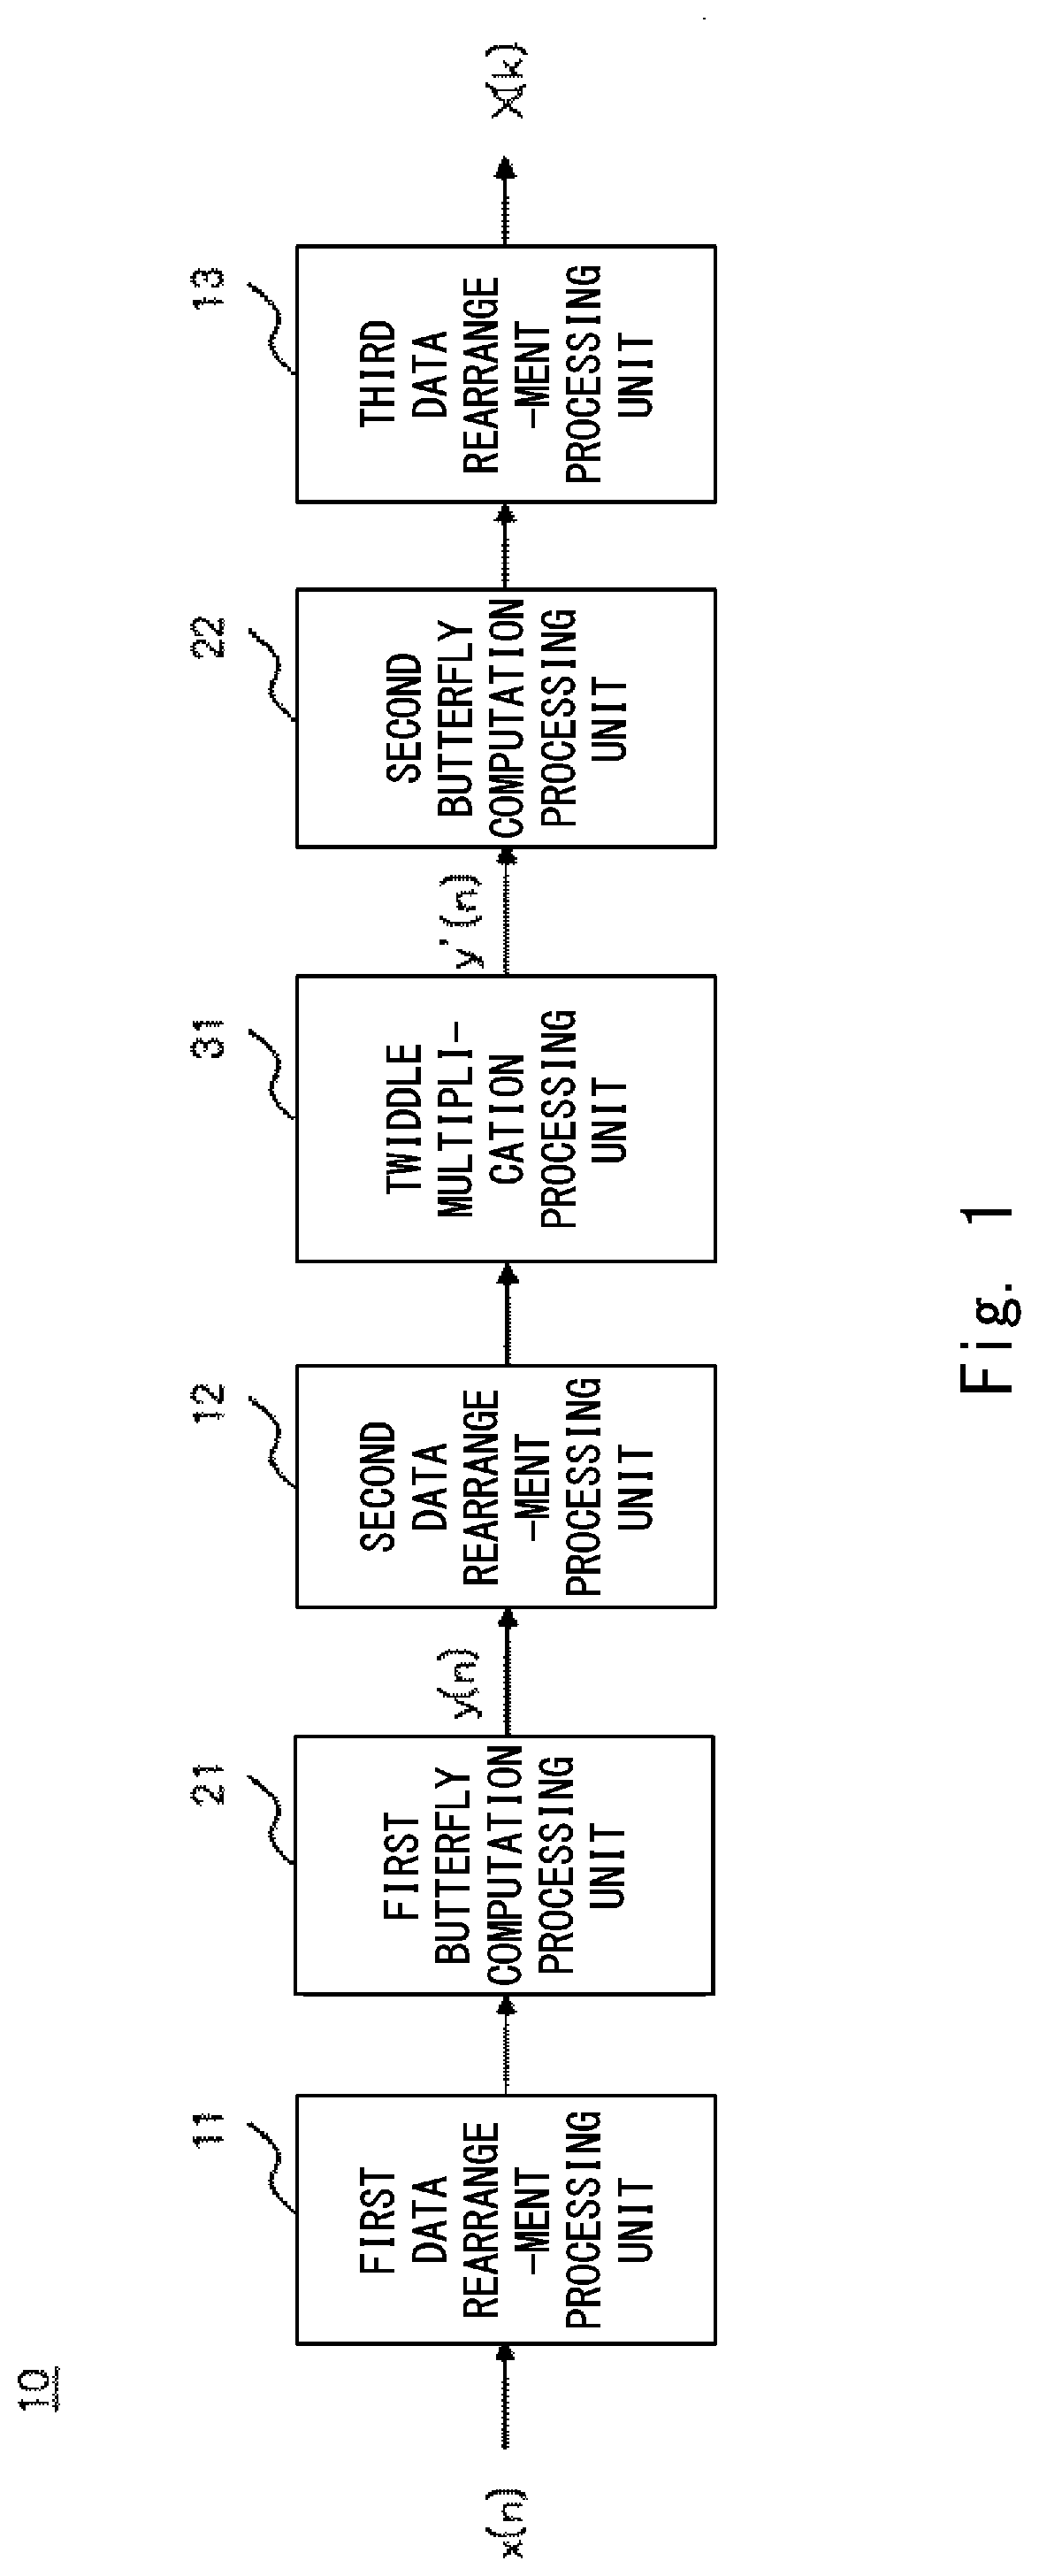 Digital filter device, operation method for digital filter device, and non-transitory computer-readable medium storing program